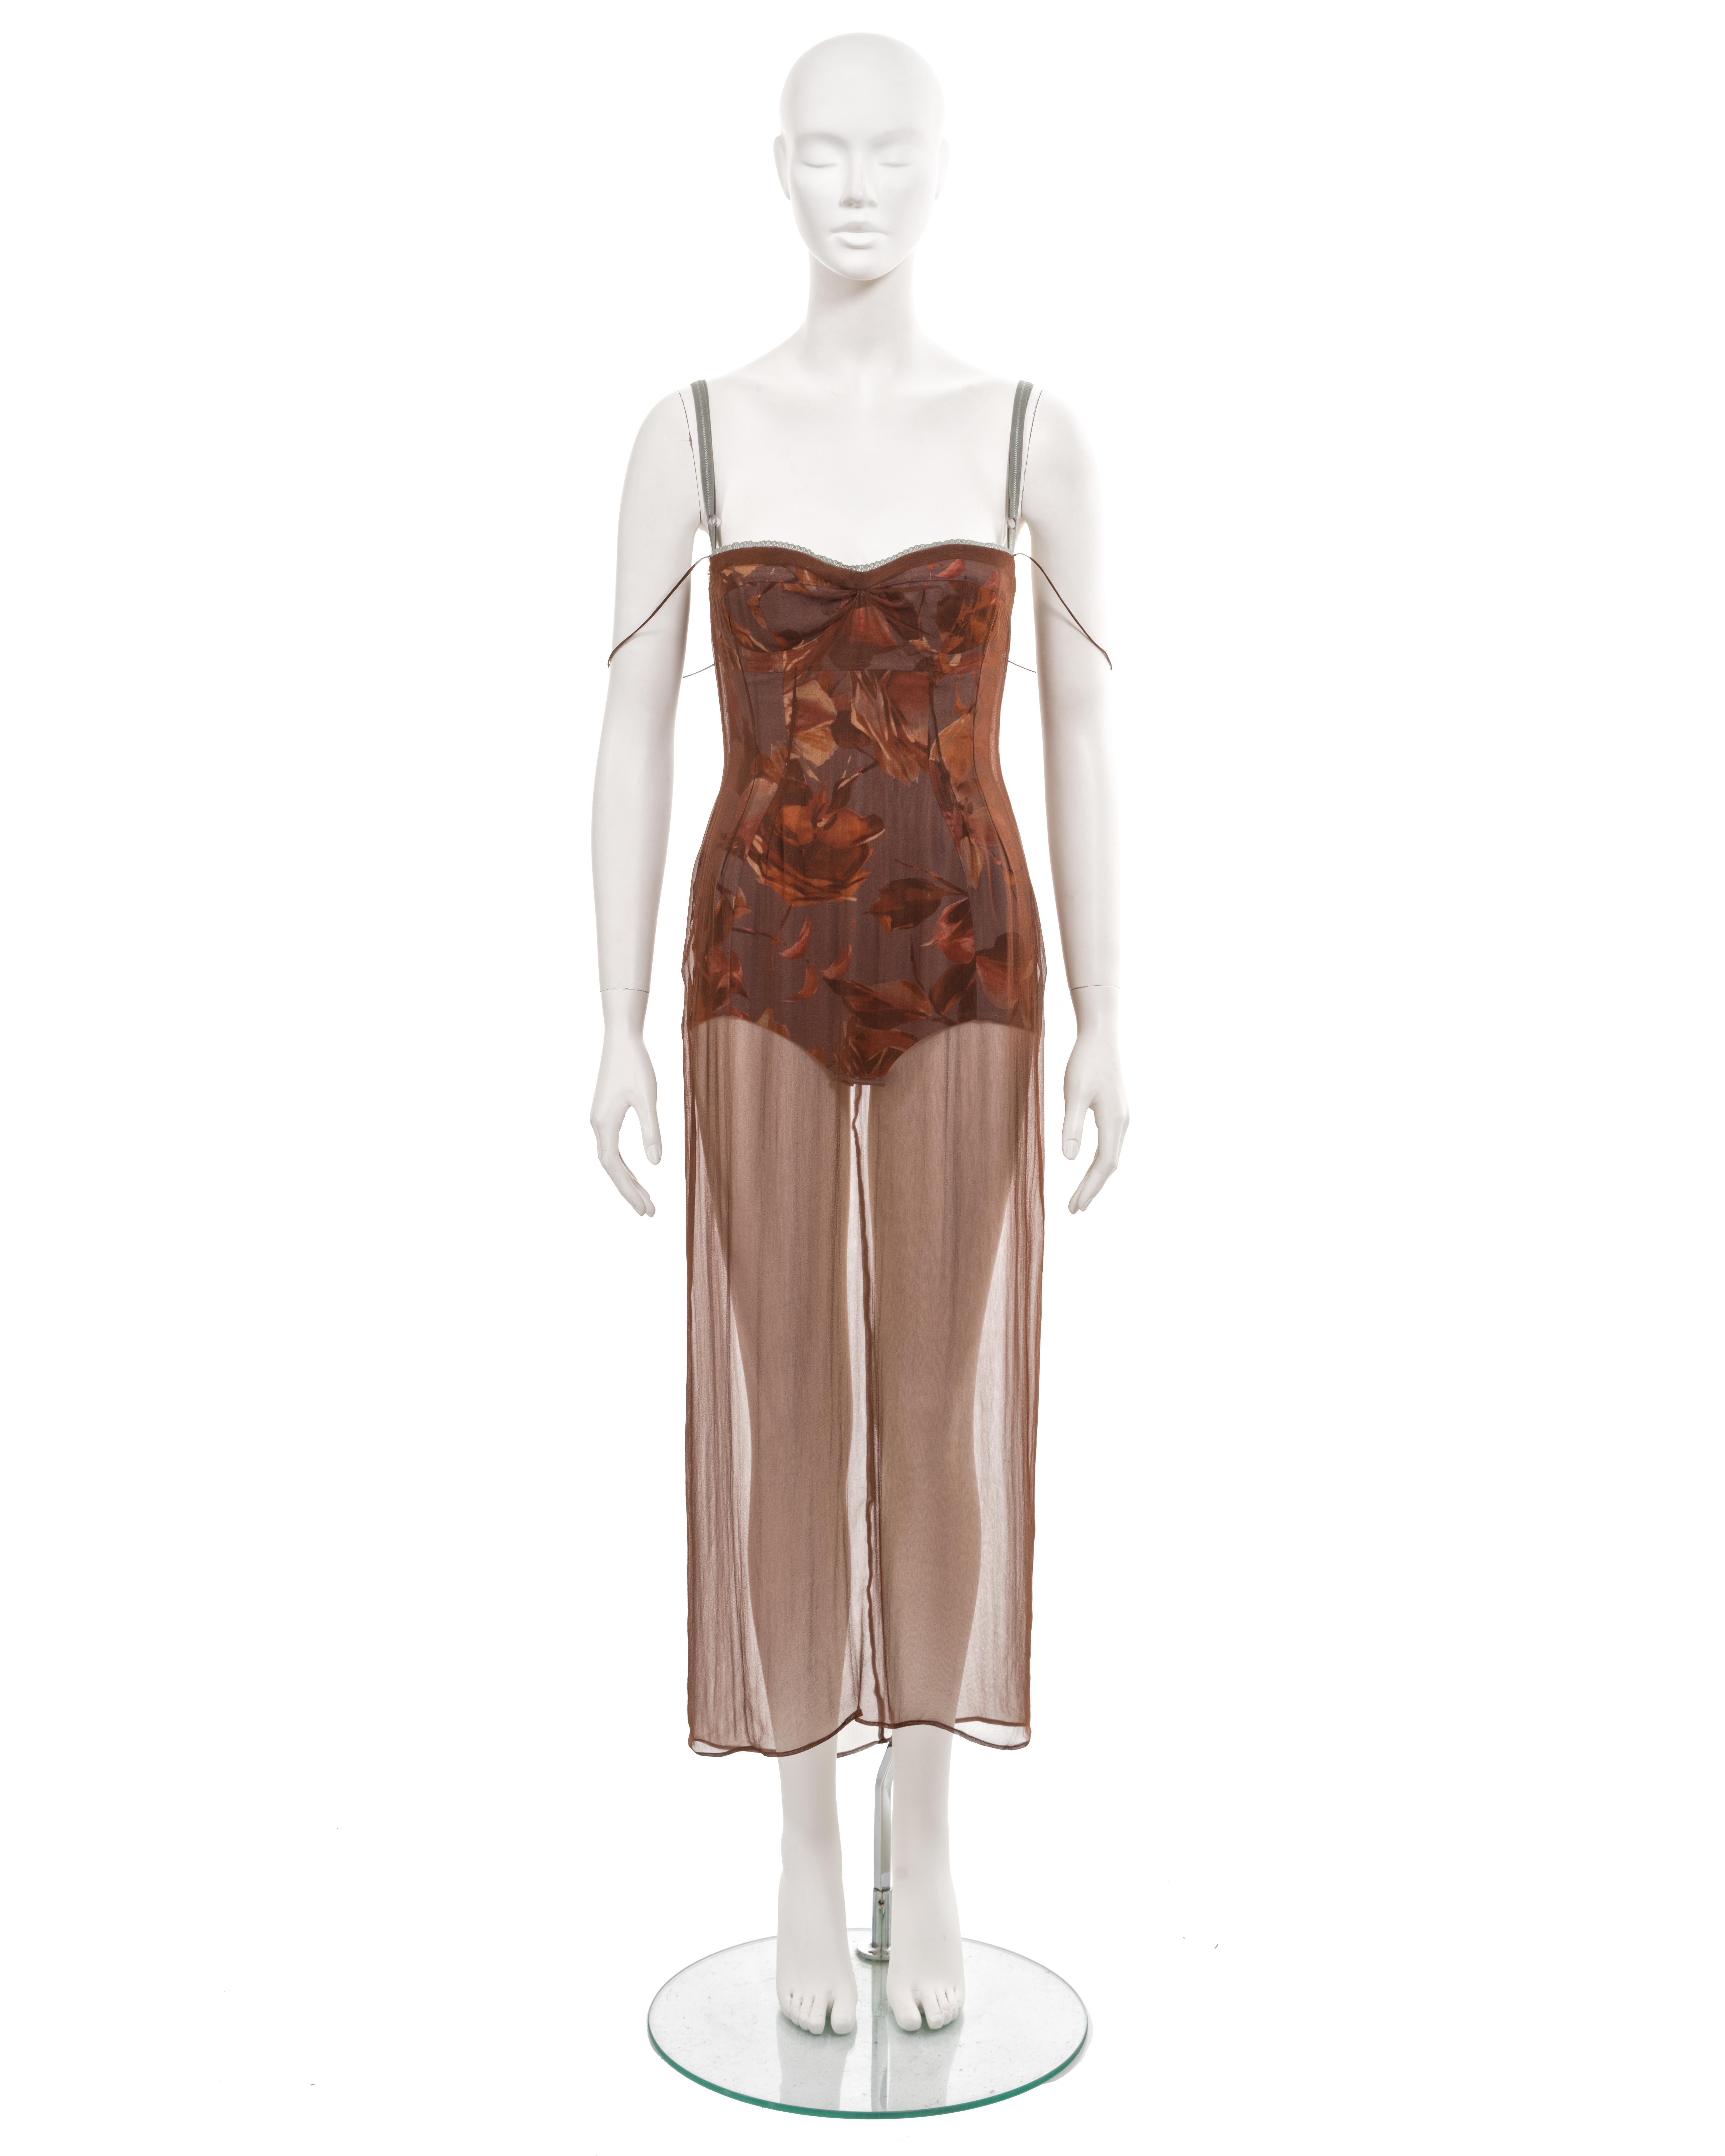 ▪ Dolce & Gabbana archival dress
▪ Sold by One of a Kind Archive
▪ Spring-Summer 1997
▪ Copper brown silk chiffon
▪ Built-in bodysuit with floral motif
▪ Corset boning 
▪ Hook-and-eye closures 
▪ Adjustable shoulder straps 
▪ Transparent